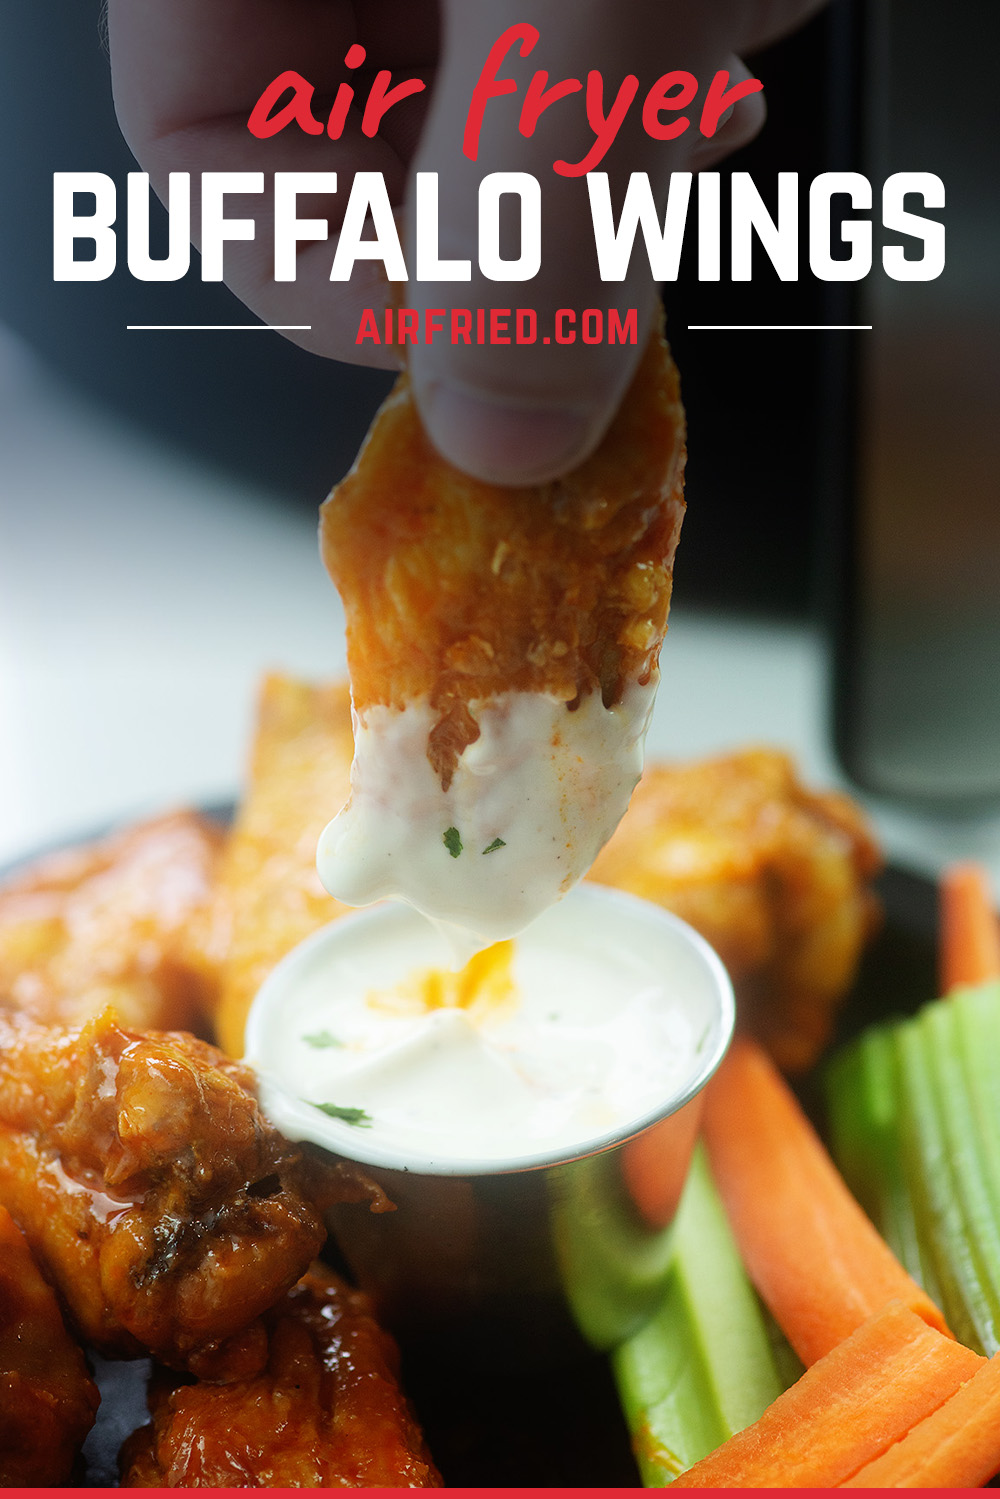 A chicken wing being dipped into ranch dressing